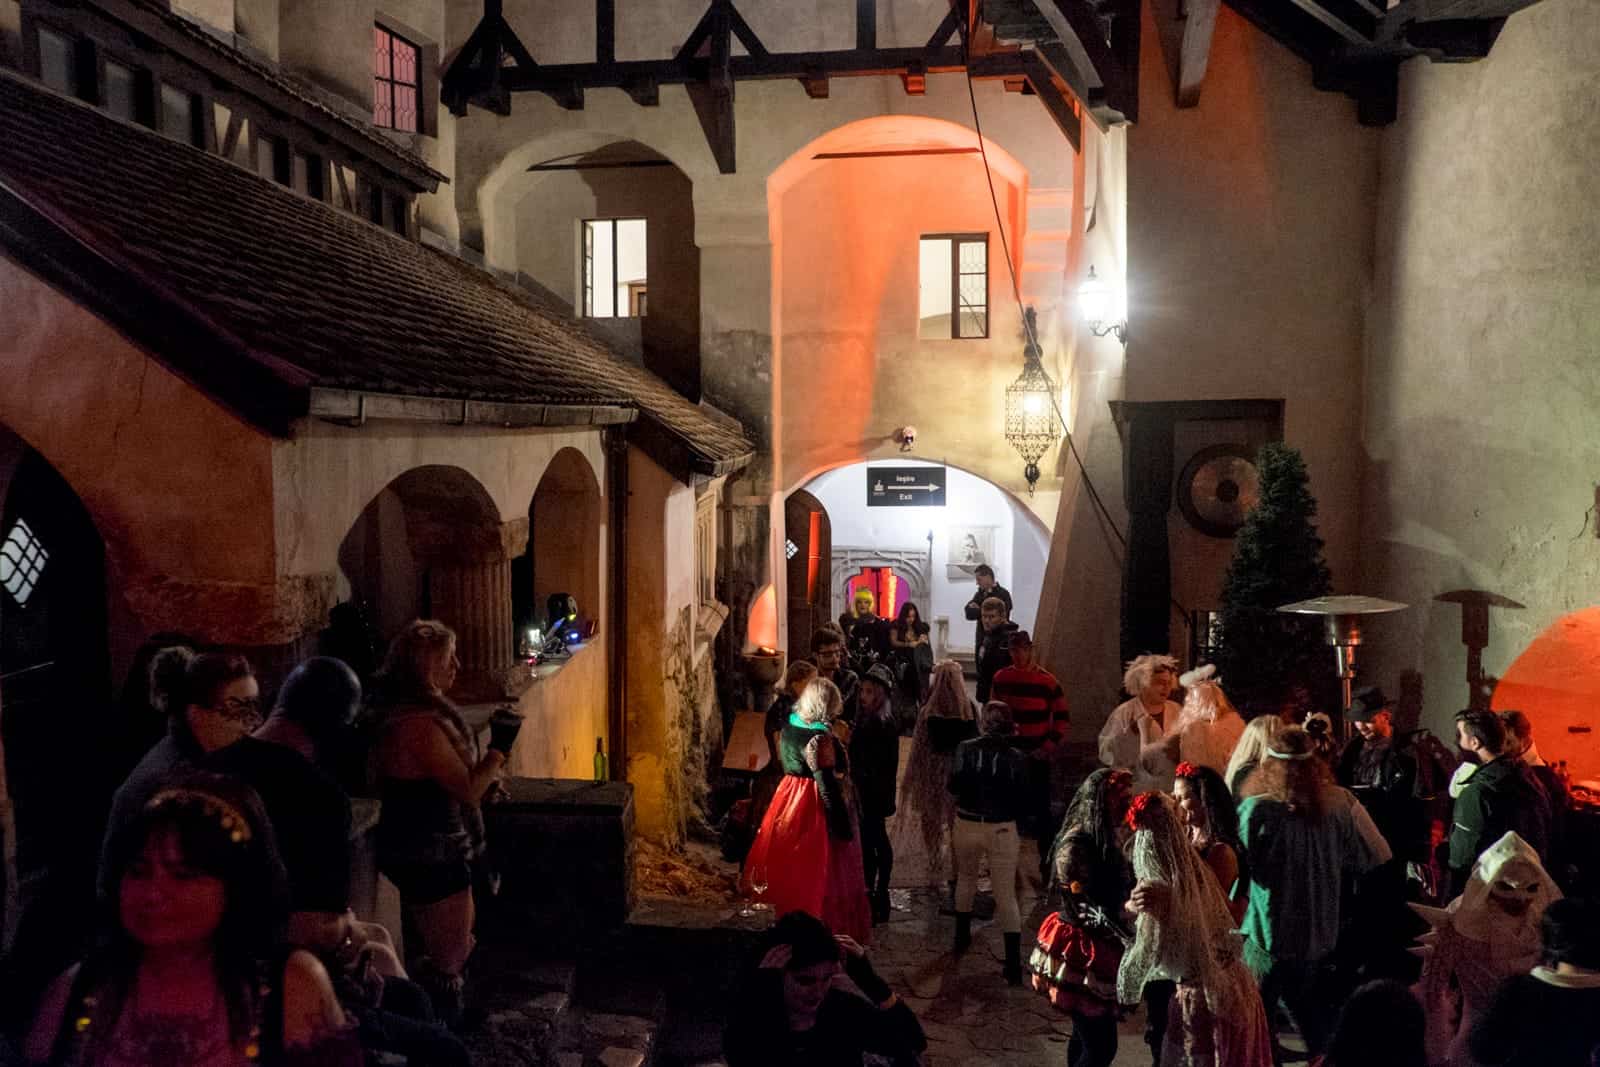 A costume Halloween party inside the old courtyard of Bran Castle, Transylvania, Romania